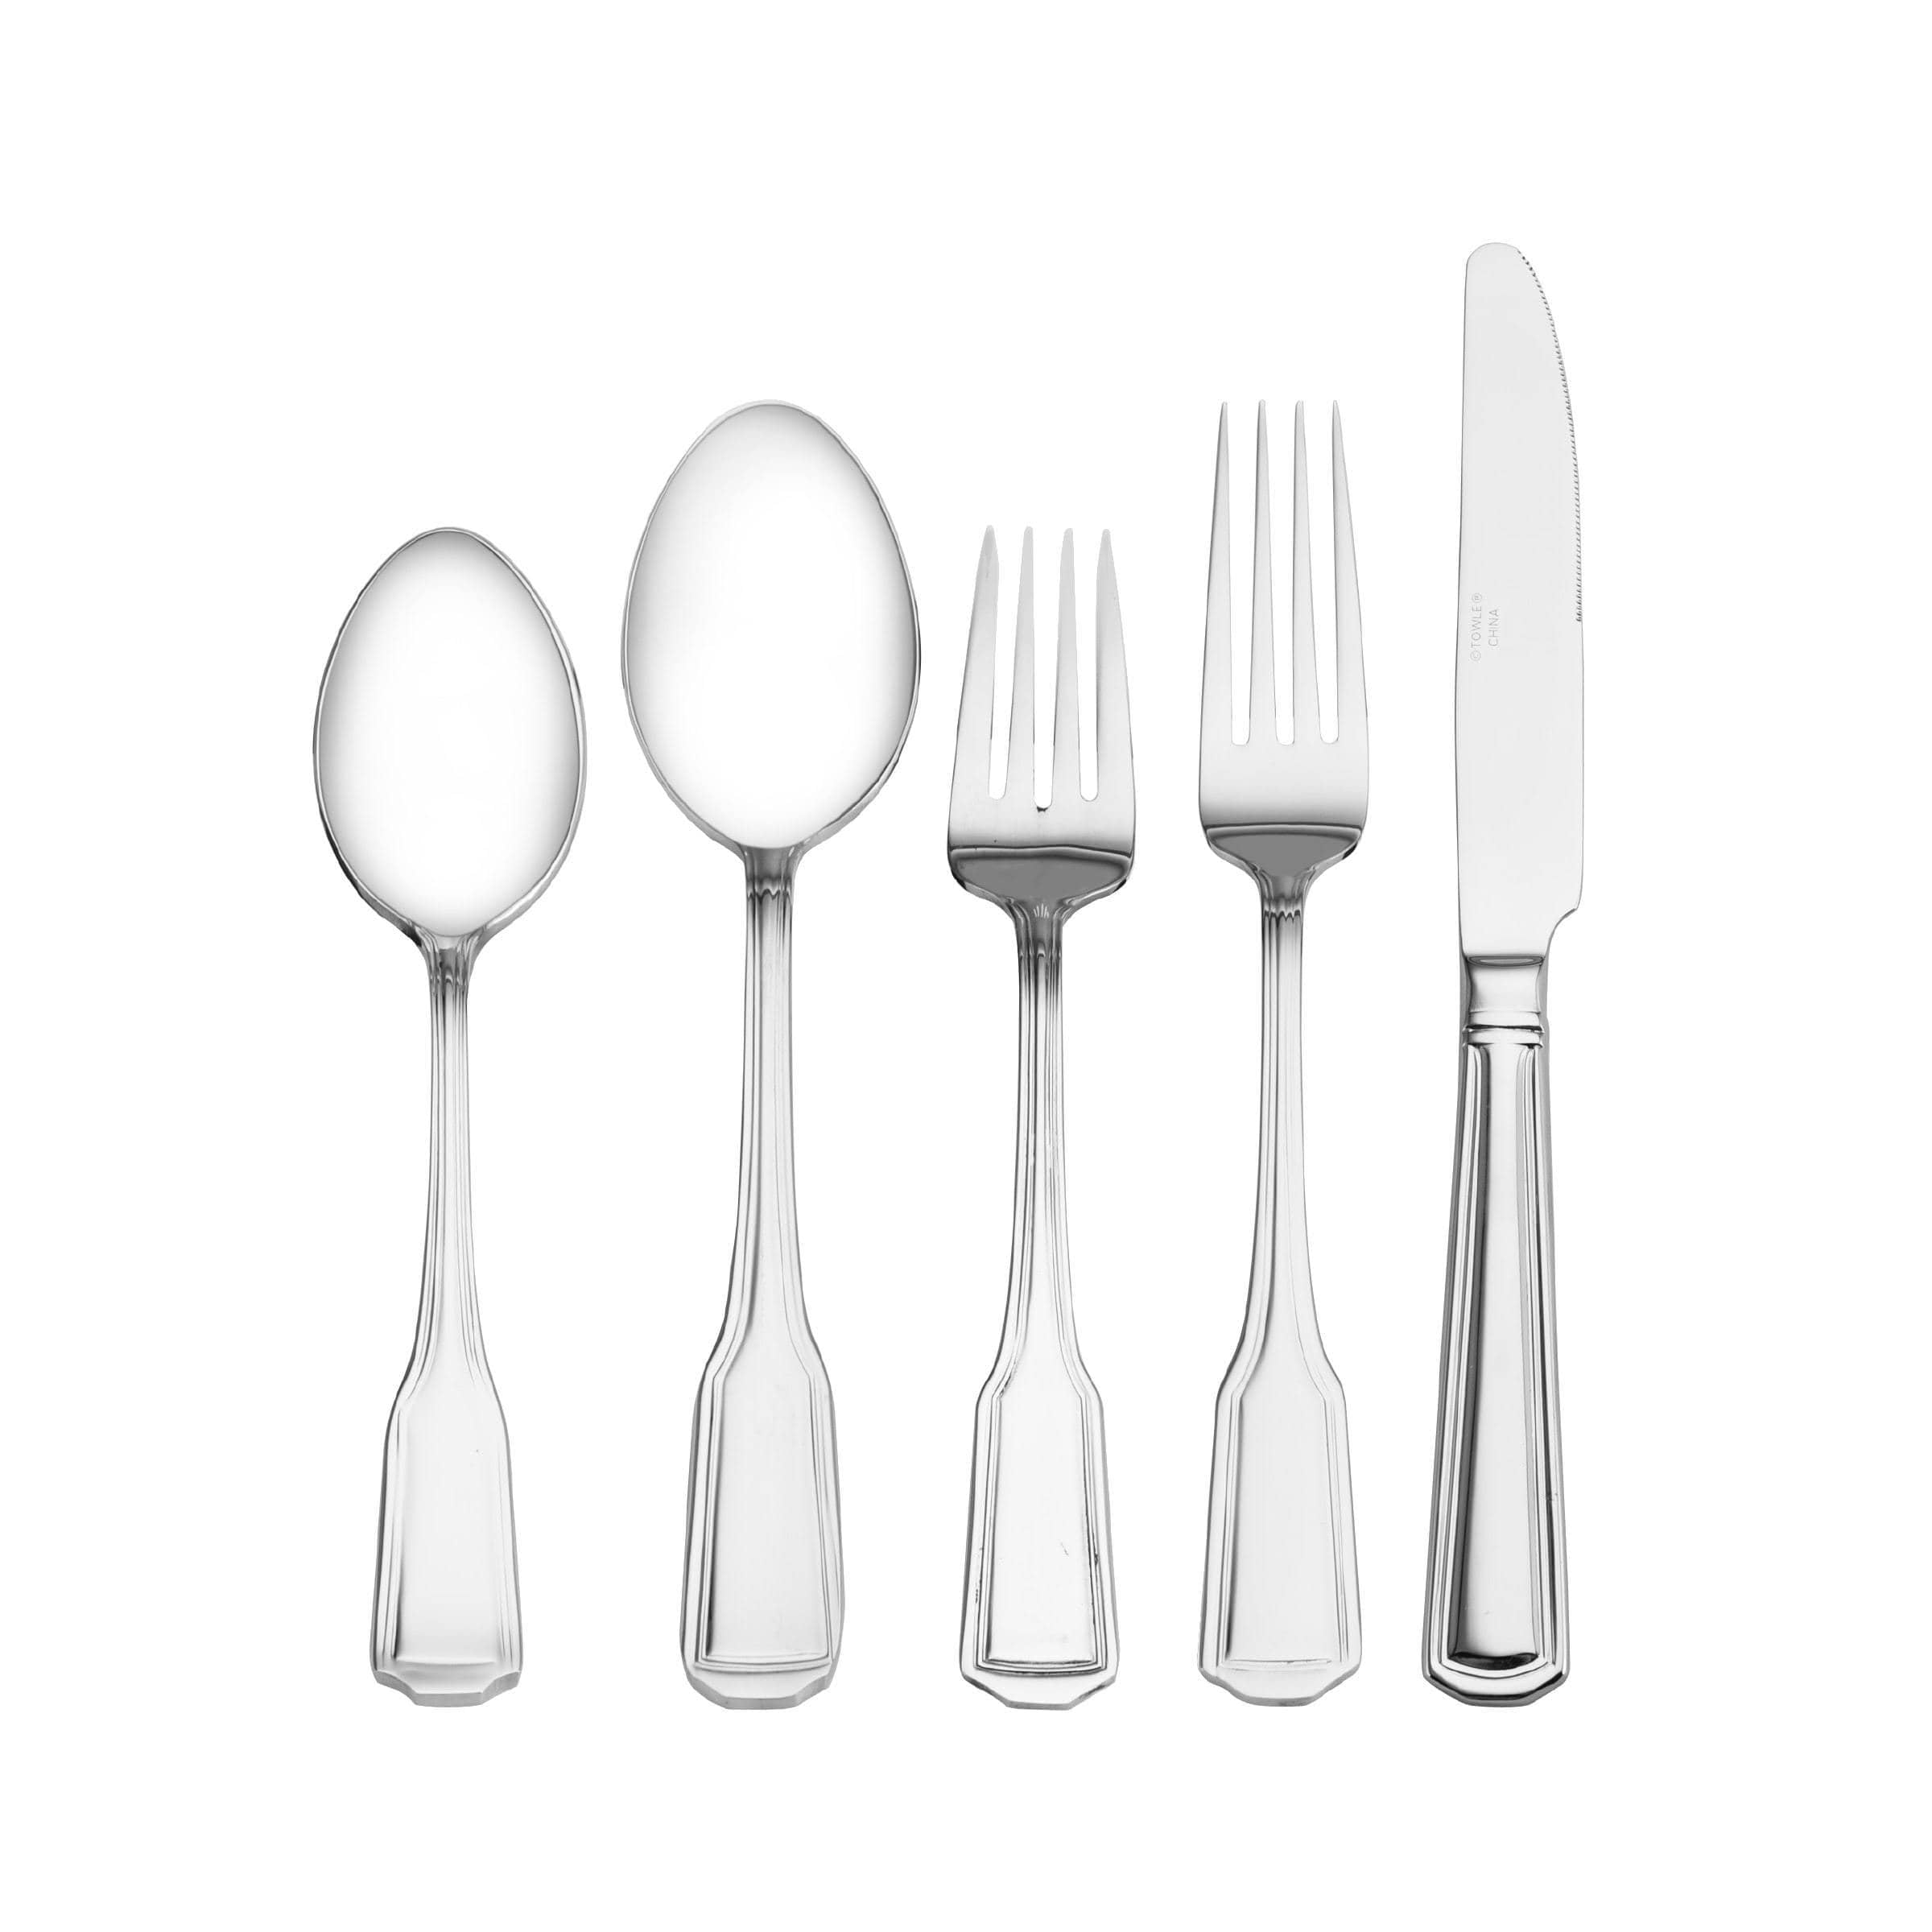 Details about   Towle 18/10 Stainless BOSTON ANTIQUE Flatware Silverware NEW Your Choice 